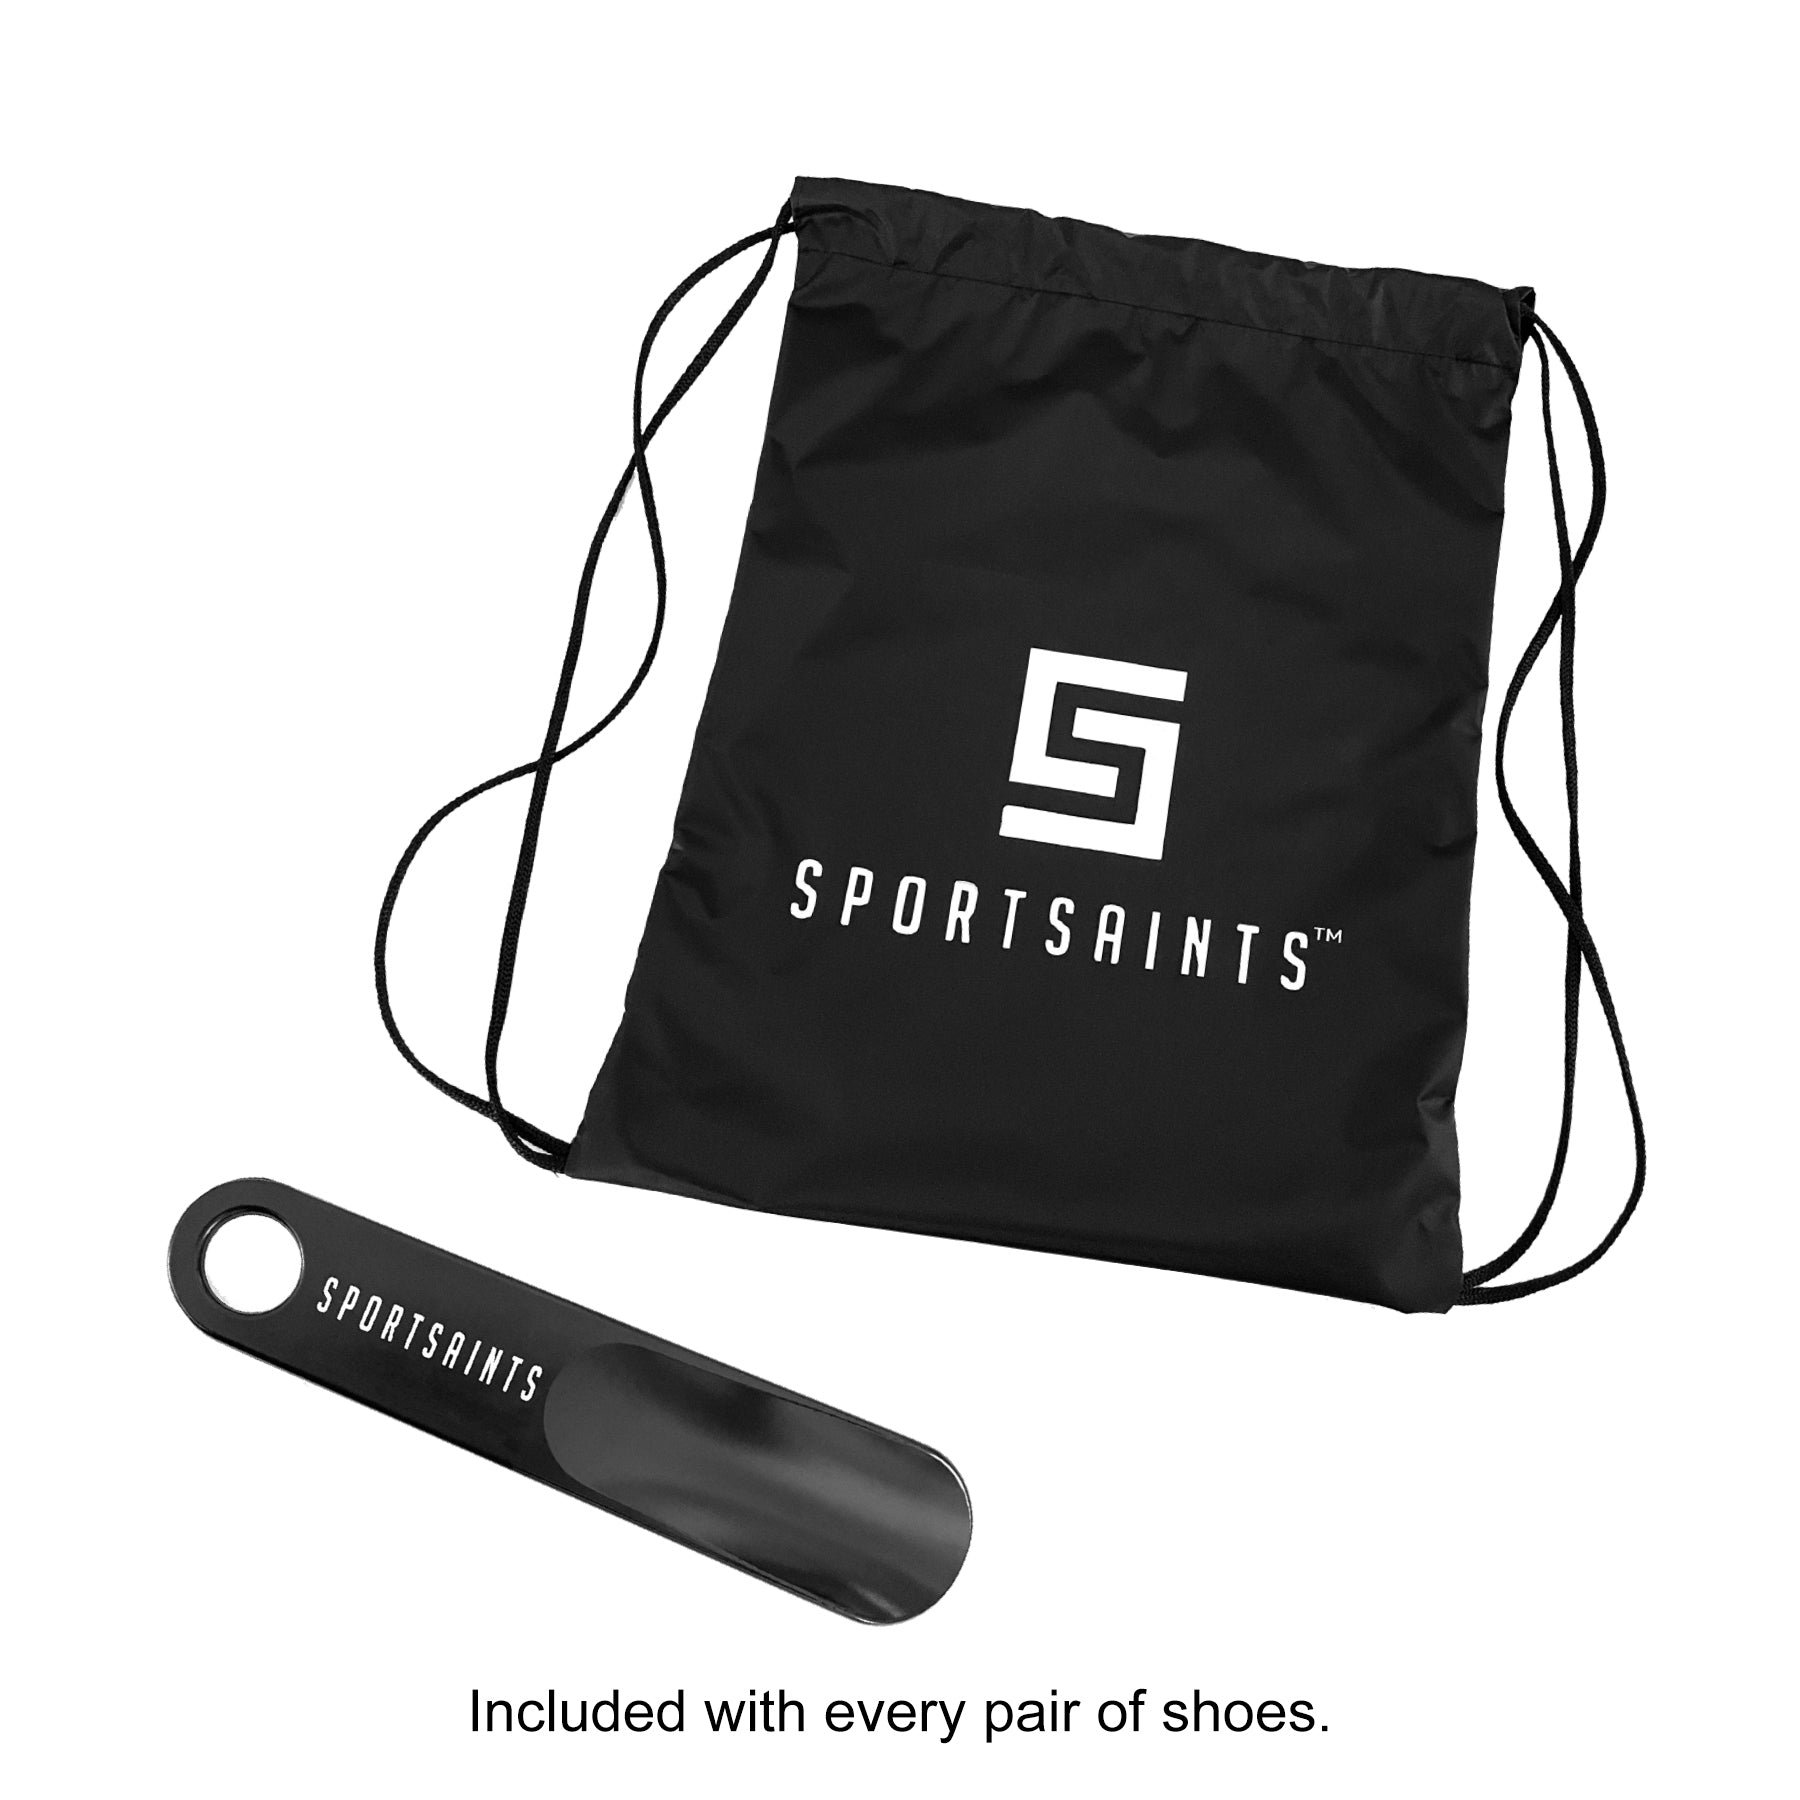 Drawstring shoe bag and shoe horn included with every pair of shoes.